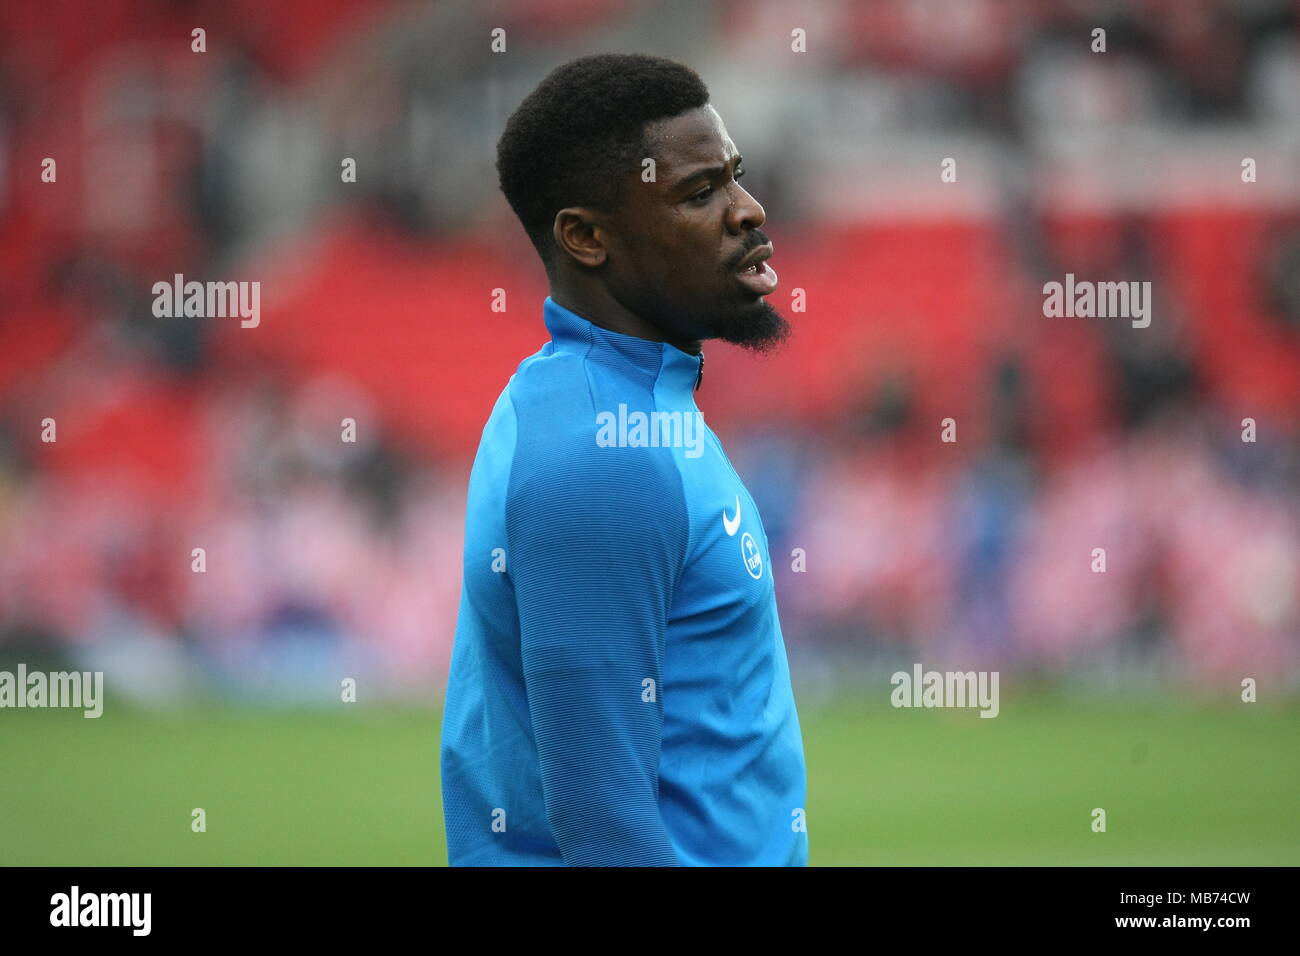 Stoke, UK. 7th April 2018. Stoke, Staffordshire, UK. 7th April, 2018. Tottenham Hotspur players warm up ahead of their 2-1 win over Stoke City at the Bet 365 Stadium.  Pictured: Serge Aurier of Tottenham Hotspur Credit: Simon Newbury/Alamy Live News Stock Photo